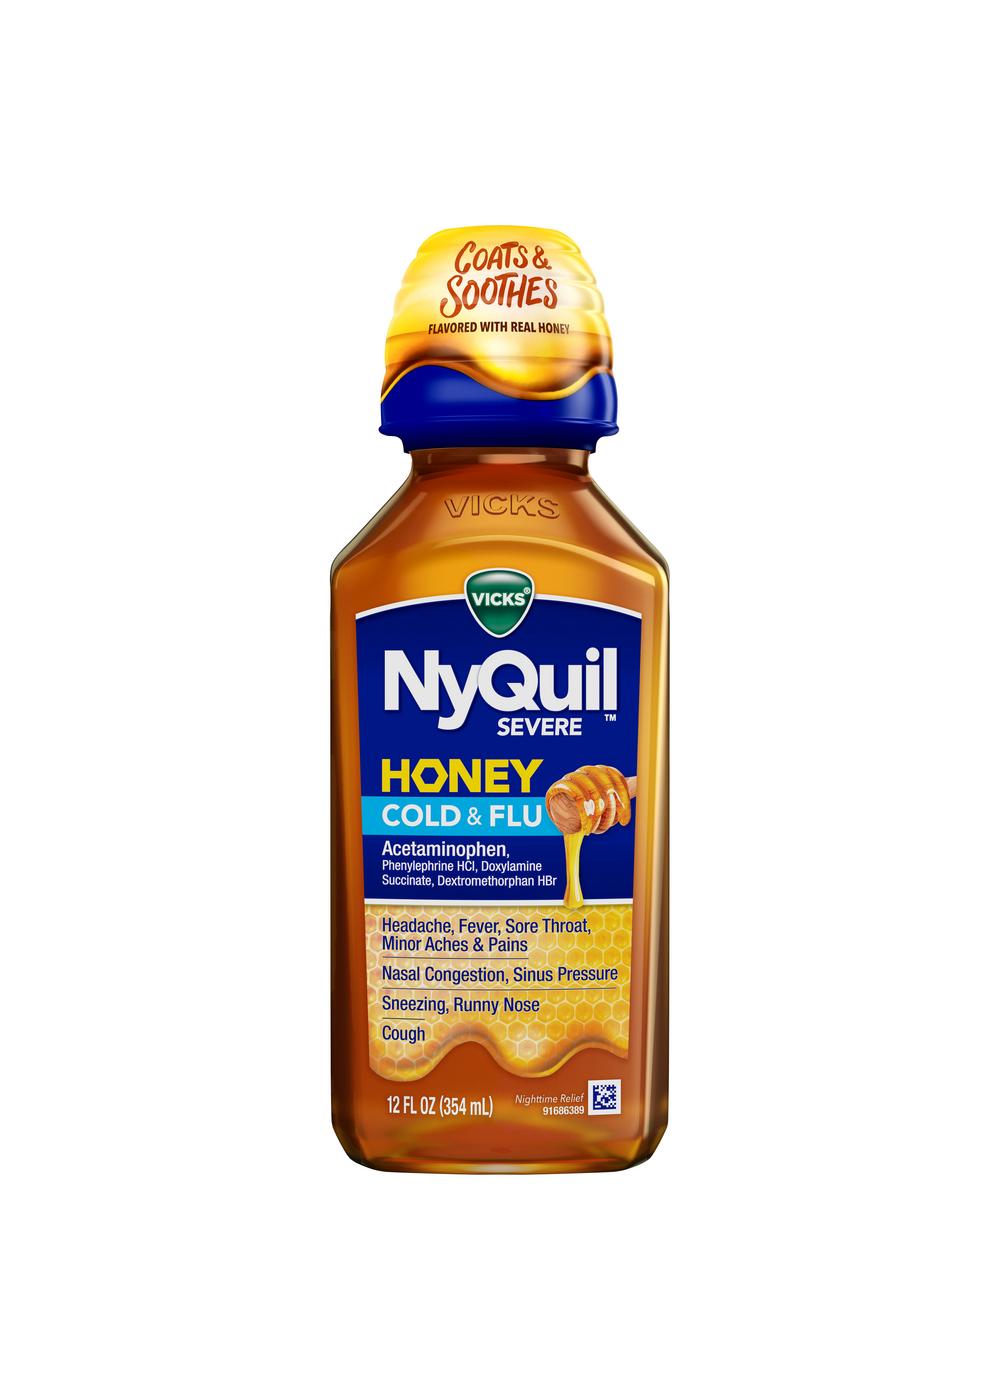 Vicks NyQuil SEVERE Cold & Flu Liquid - Honey; image 1 of 11